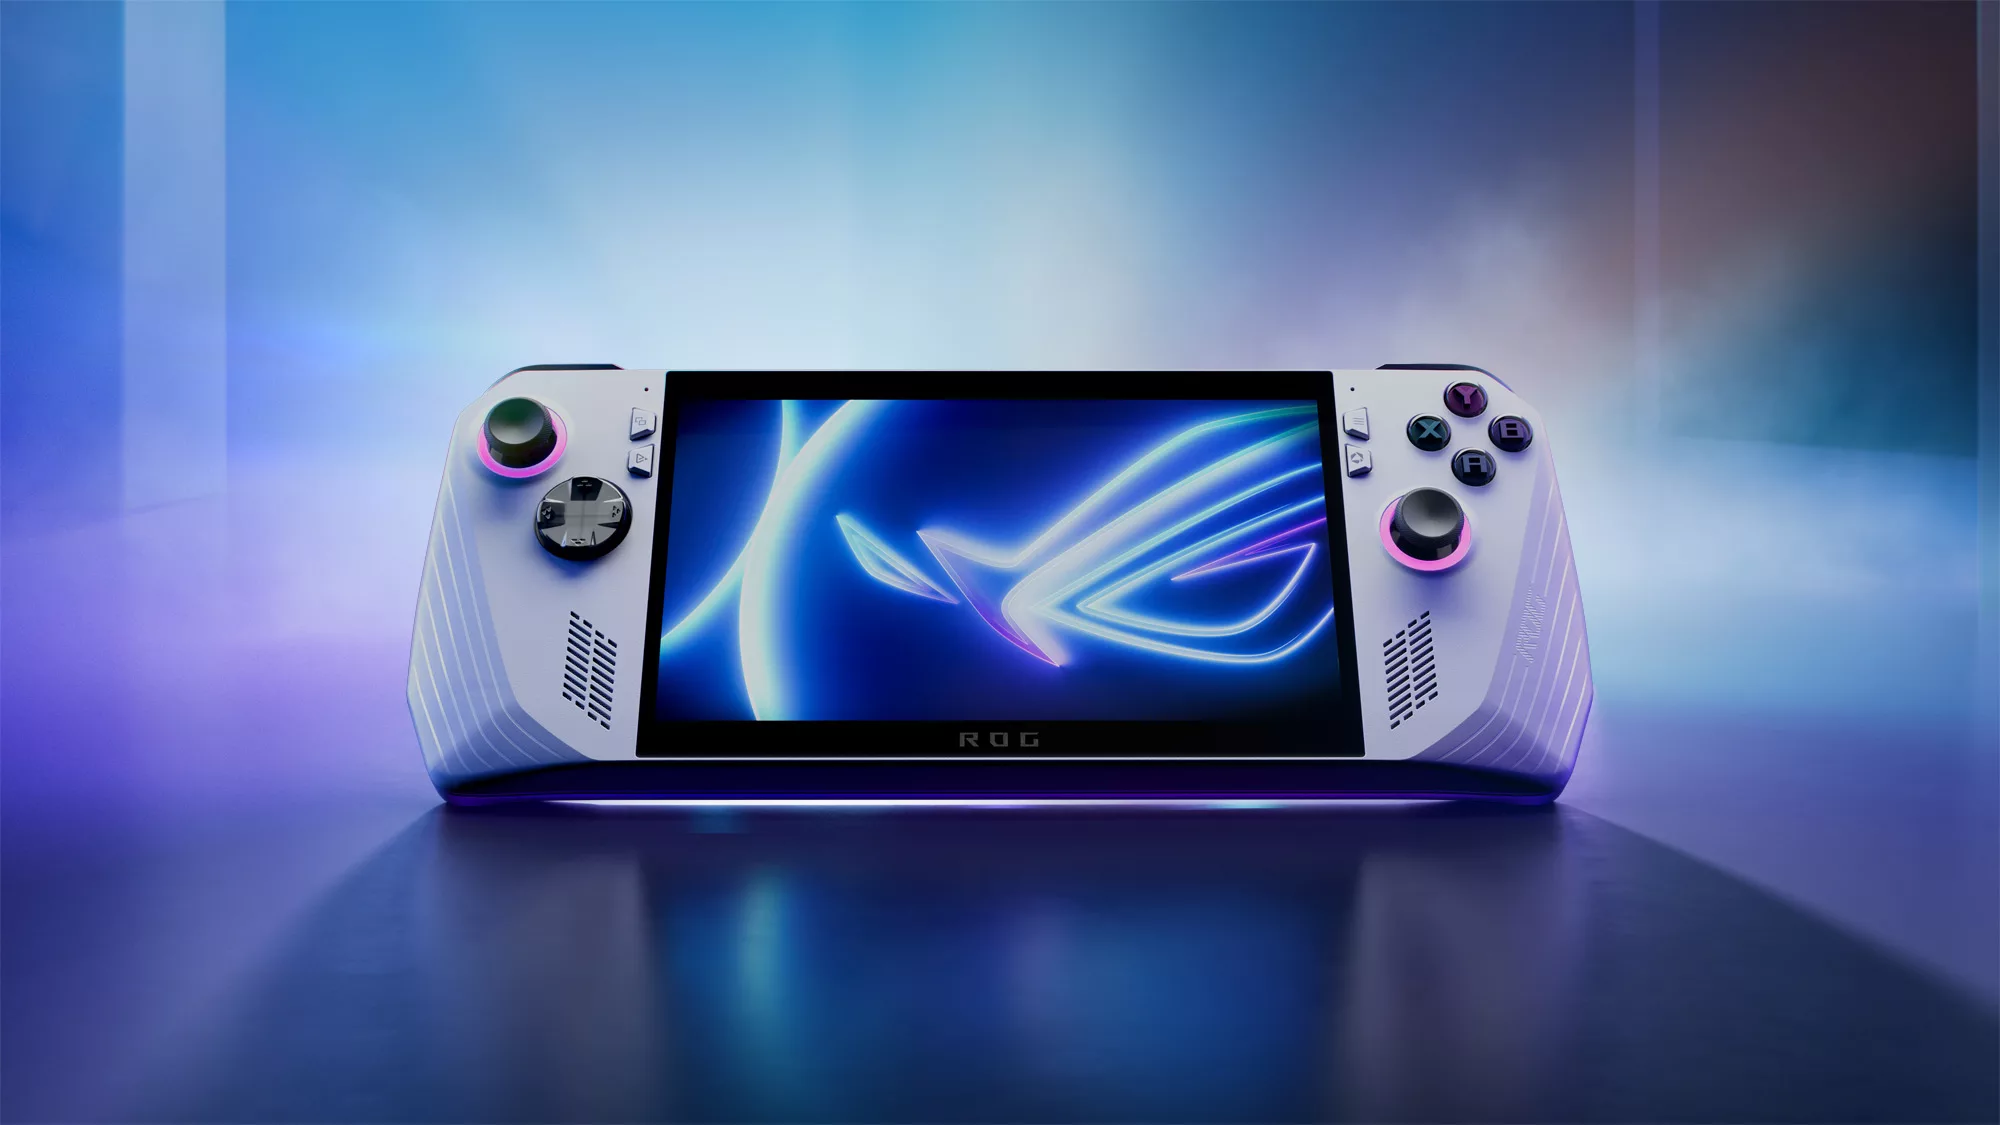 The ROG Ally handheld game system on a blue background surrounded by light rays.